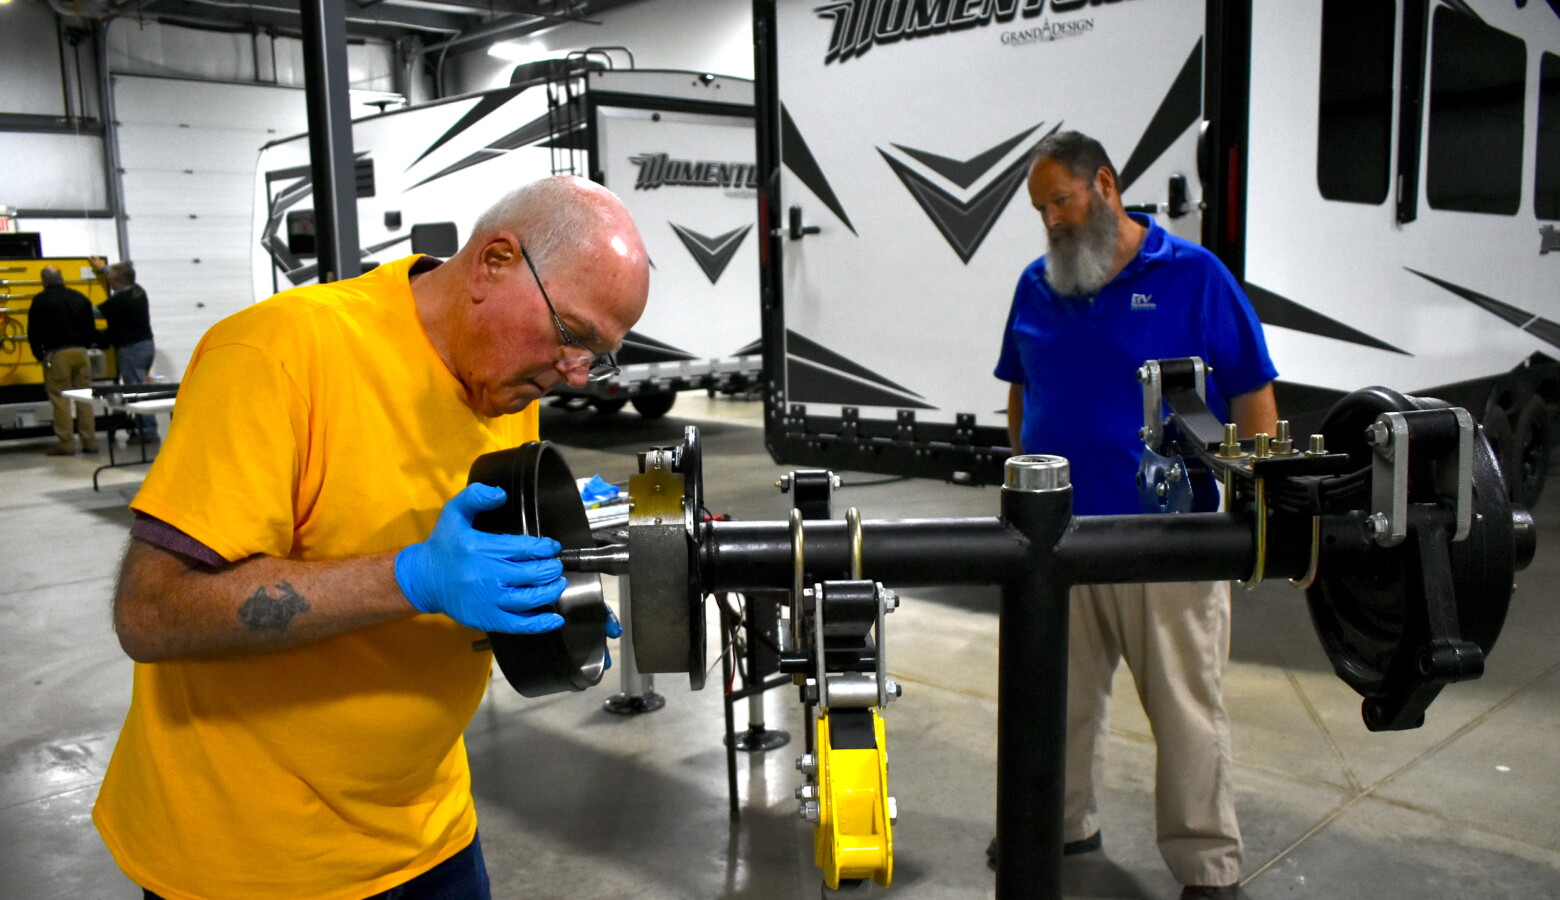 Ralph Decker completes his last practical exam under the supervision of instructor Mike Curl at the RV Technical Institute. (Justin Hicks/IPB News)